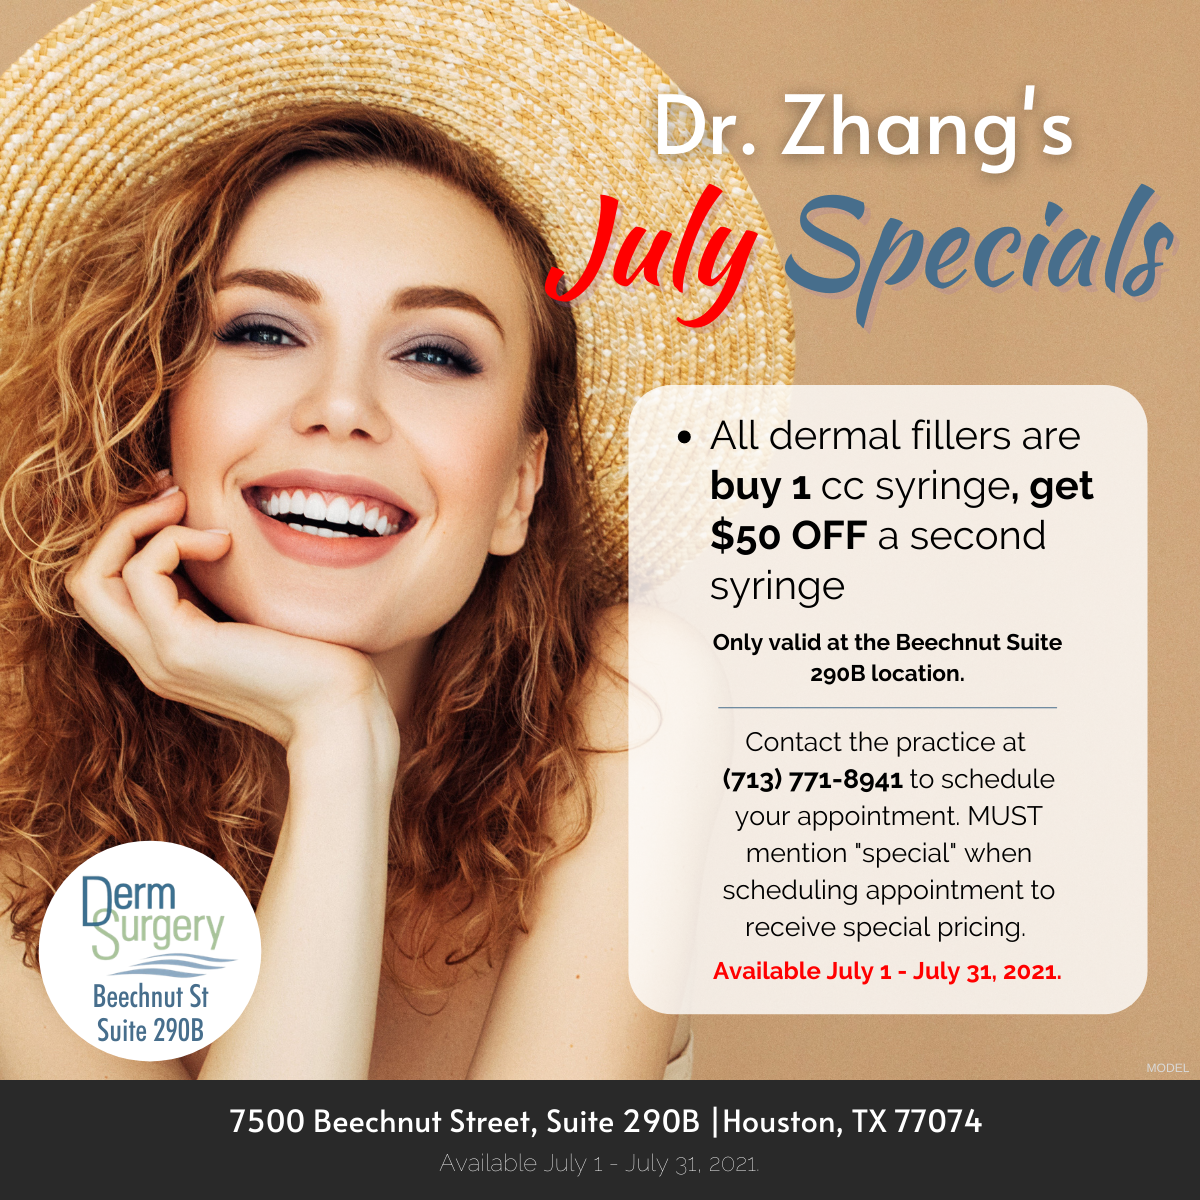 Dr. Zhang's July Specials